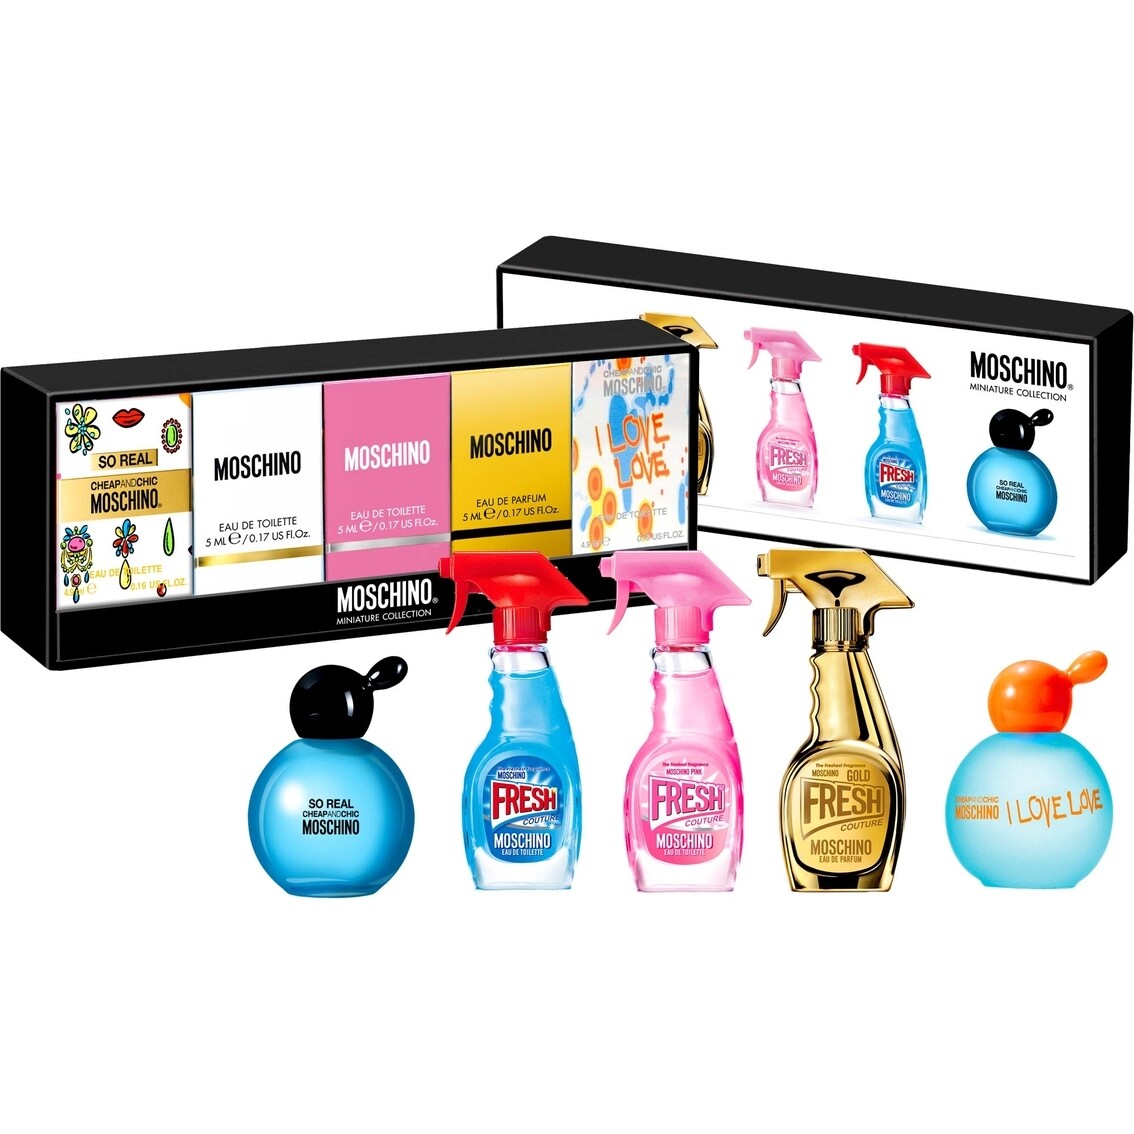 MOSCHINO MINIATURE COLLECTION 5PC / FRESH COUTURE+FRESH PINK+FRESH GOLD+SO REAL+I LOVE LOVE LOVE